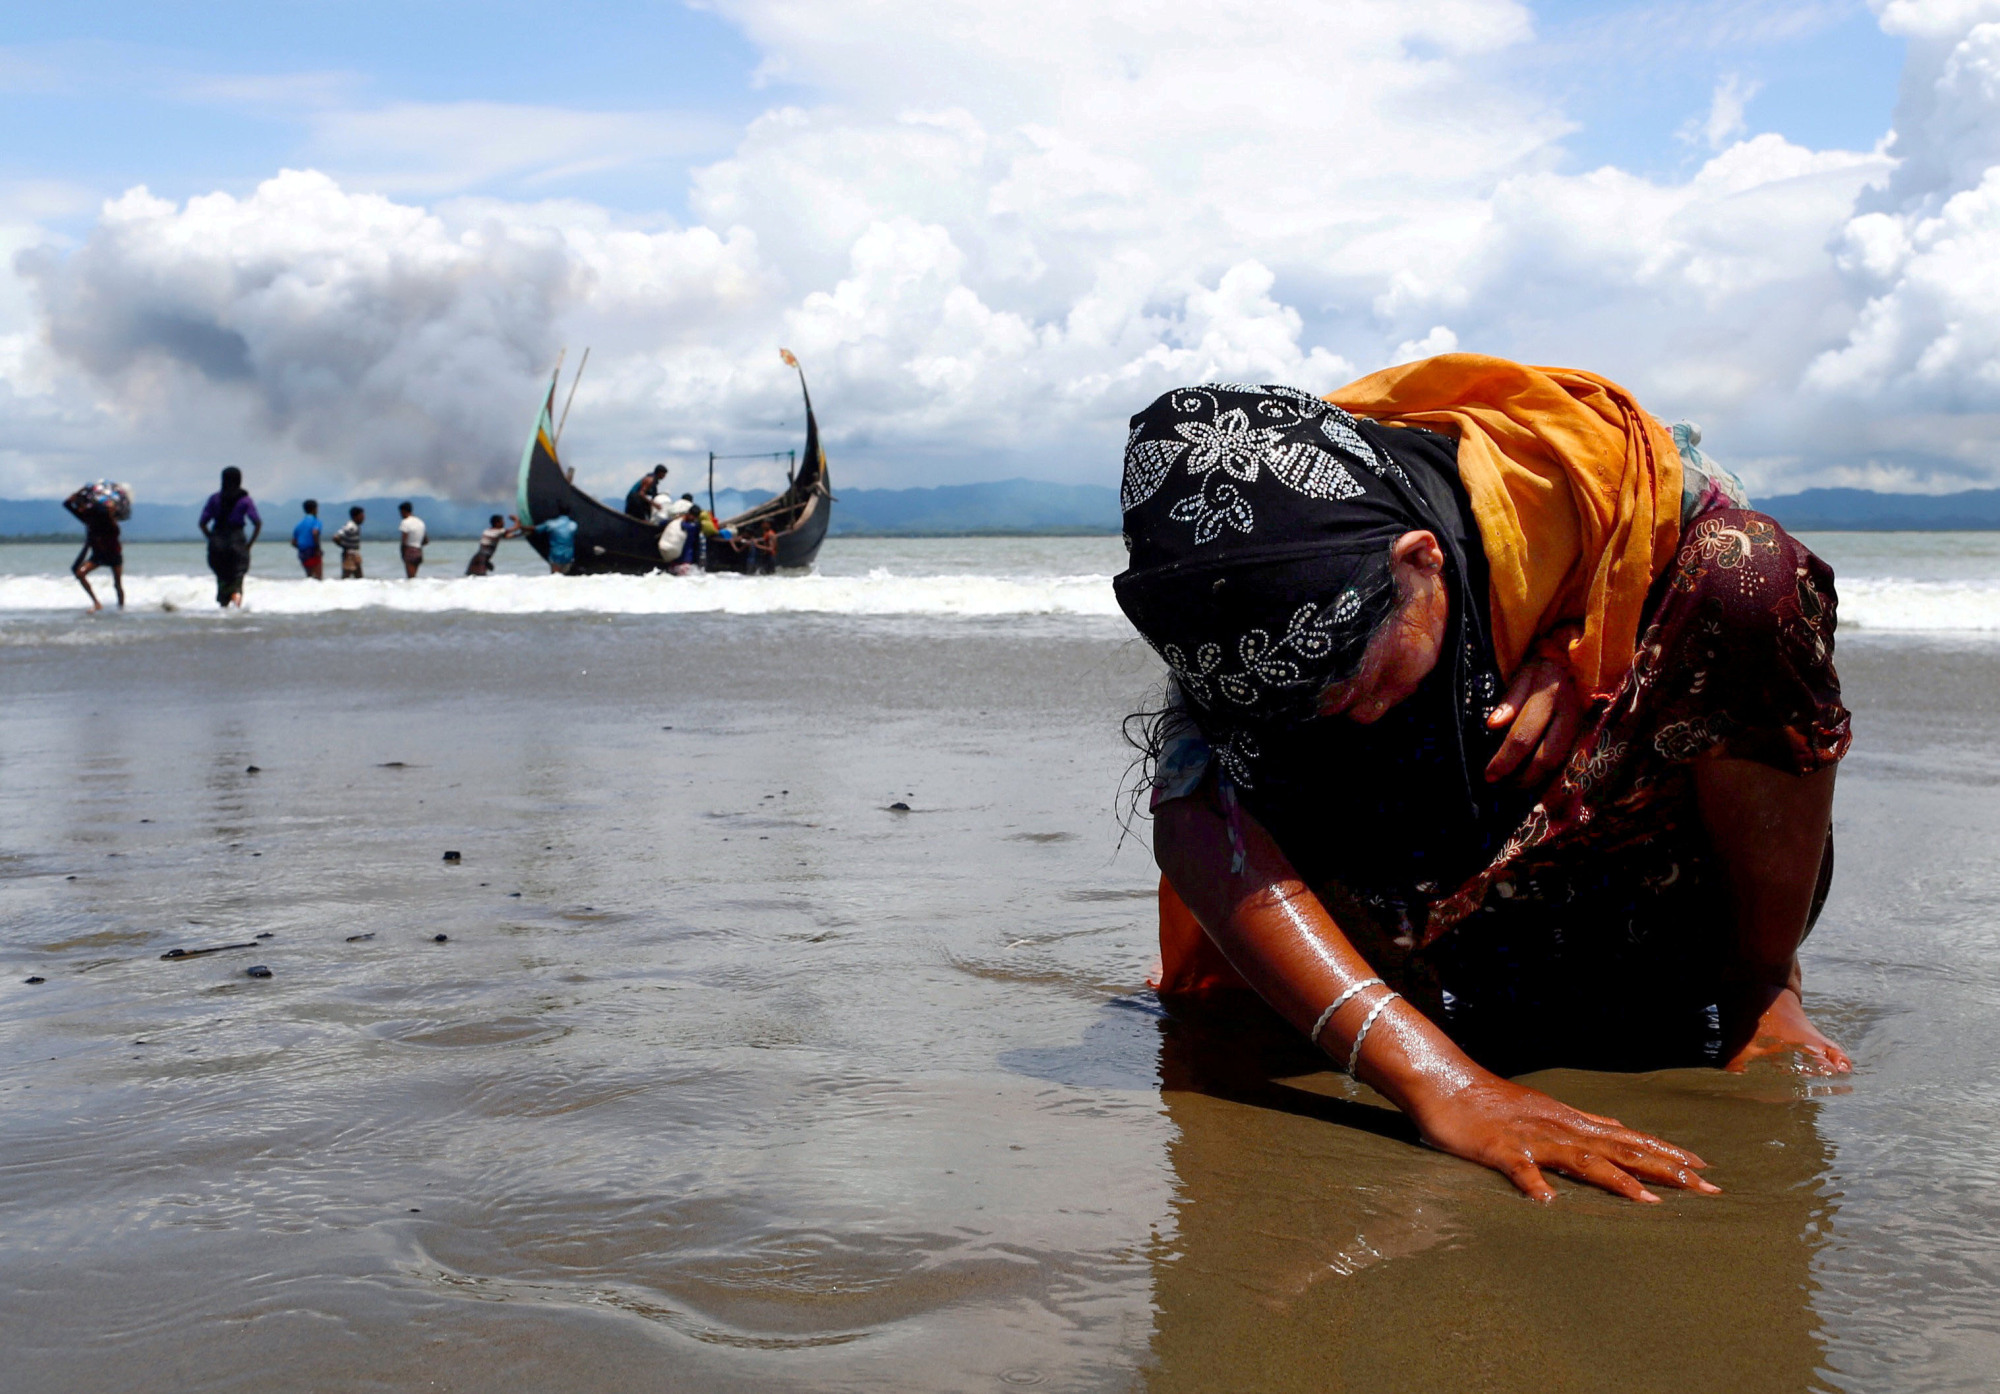 An exhausted Rohingya refugee woman touches the shore in Bangladesh after crossing the border from Myanmar through the Bay of Bengal in September 2017. | REUTERS